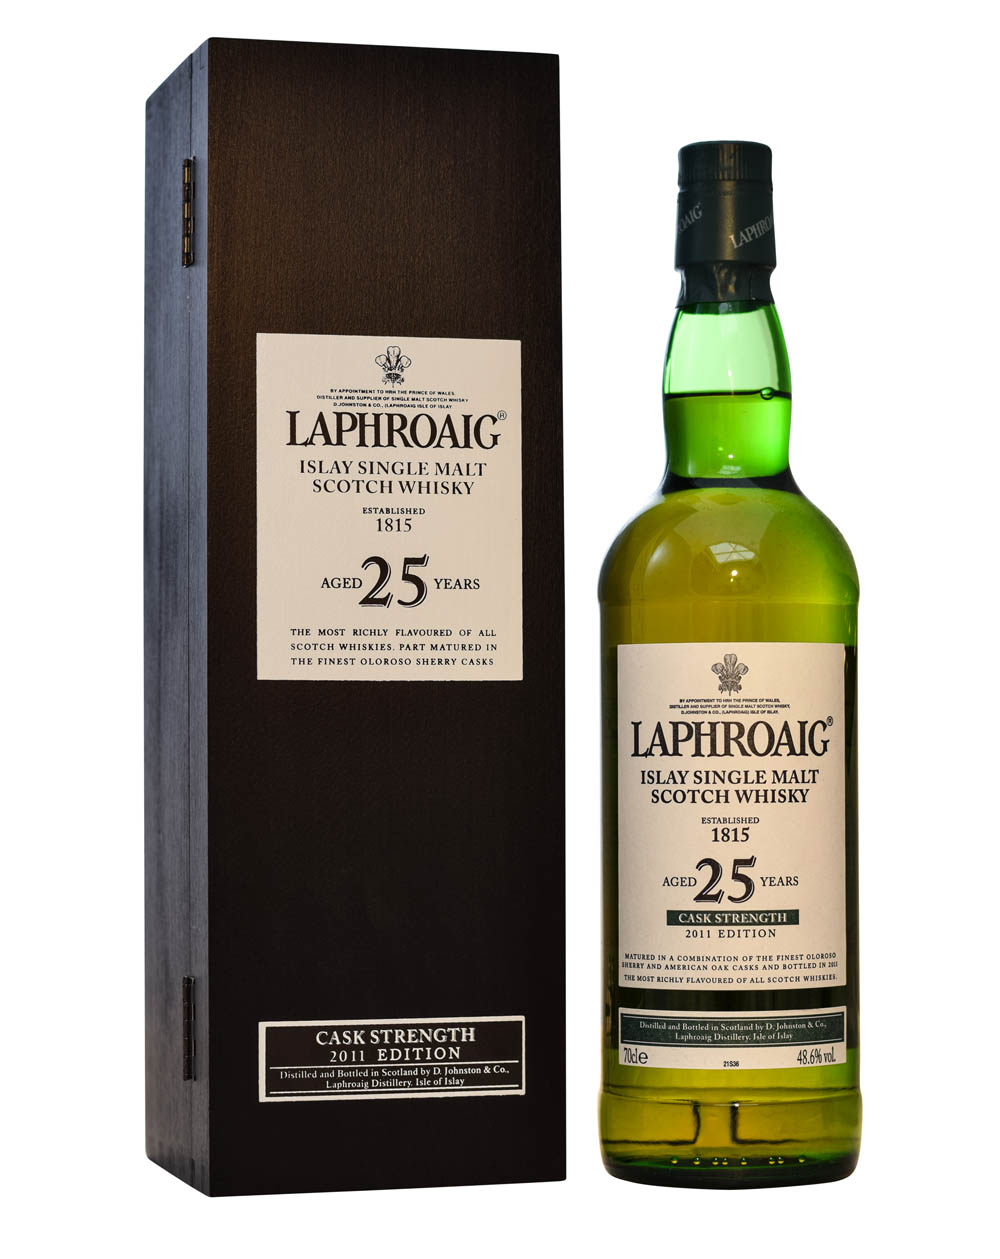 Laphroaig Cask Strength 2011 Edition (25 Years Old) - Box Musthave Malts MHM